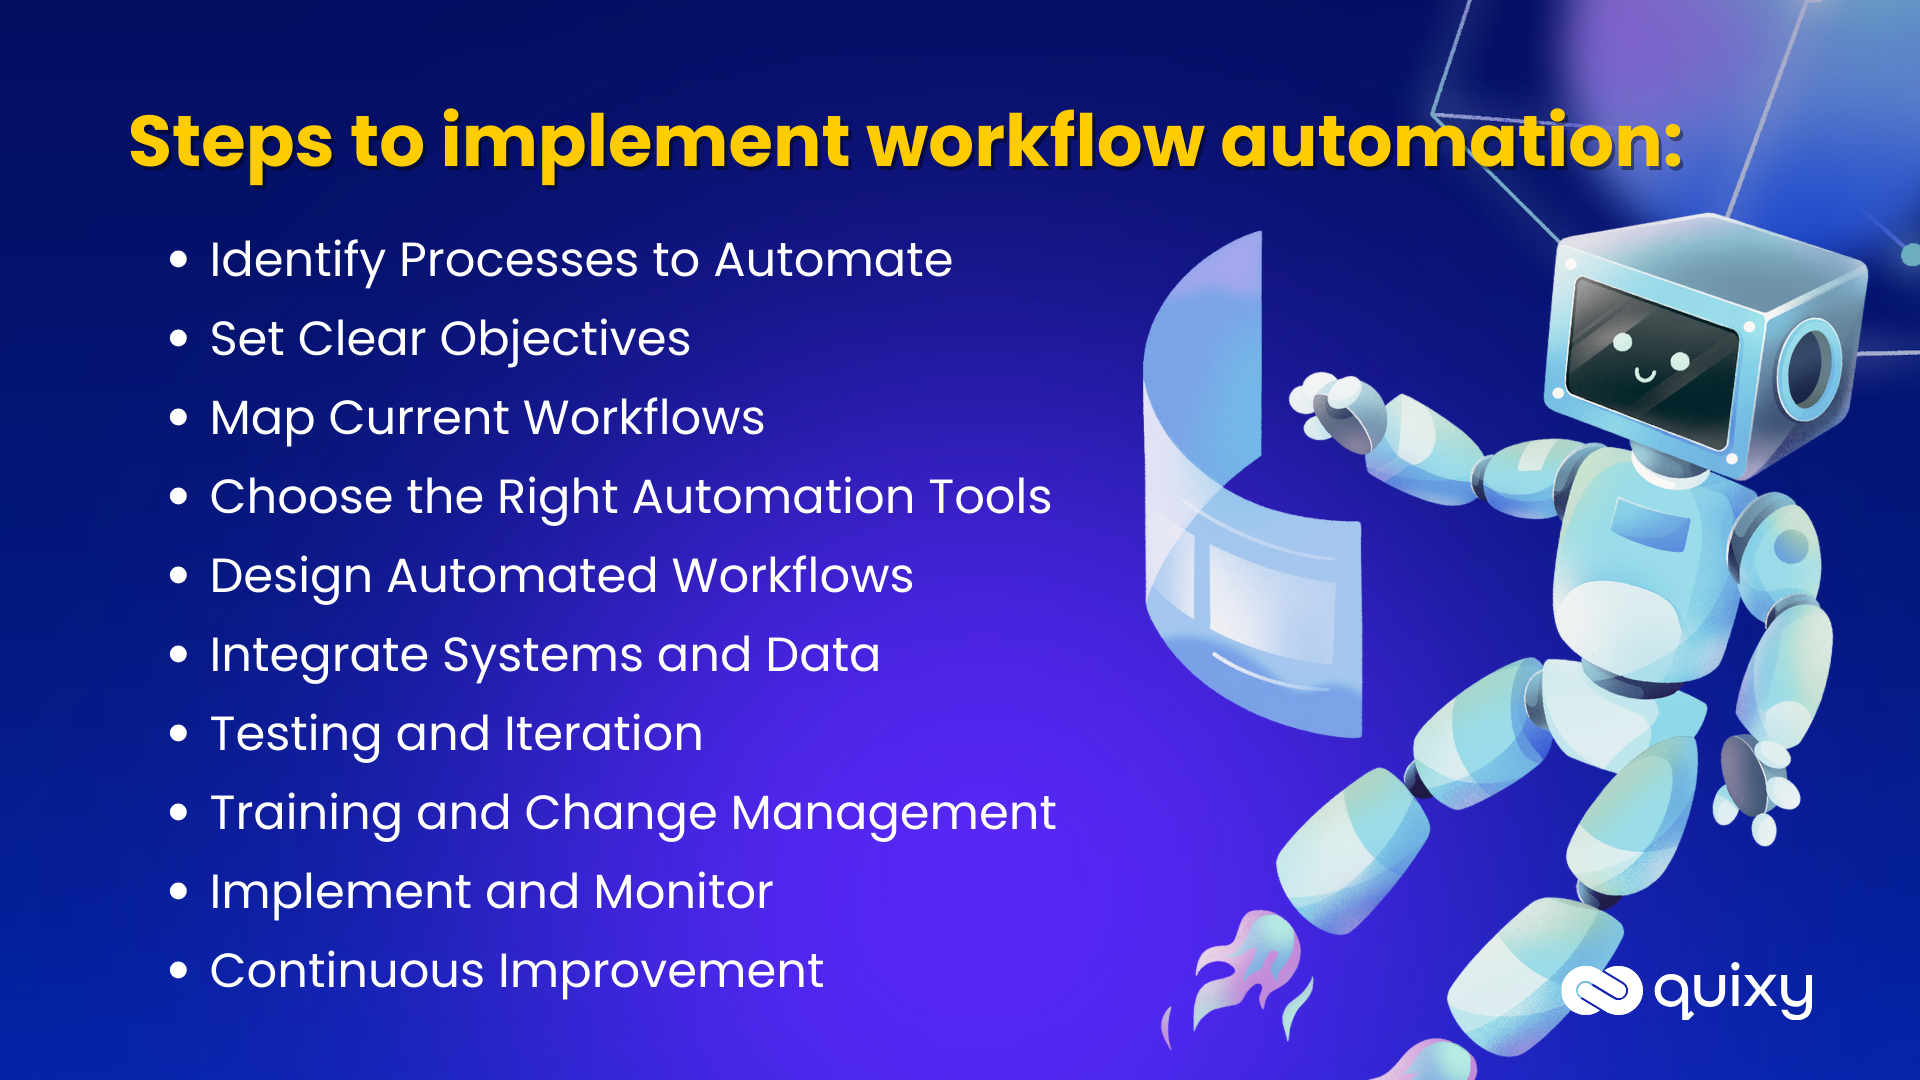 Steps to implement workflow automation